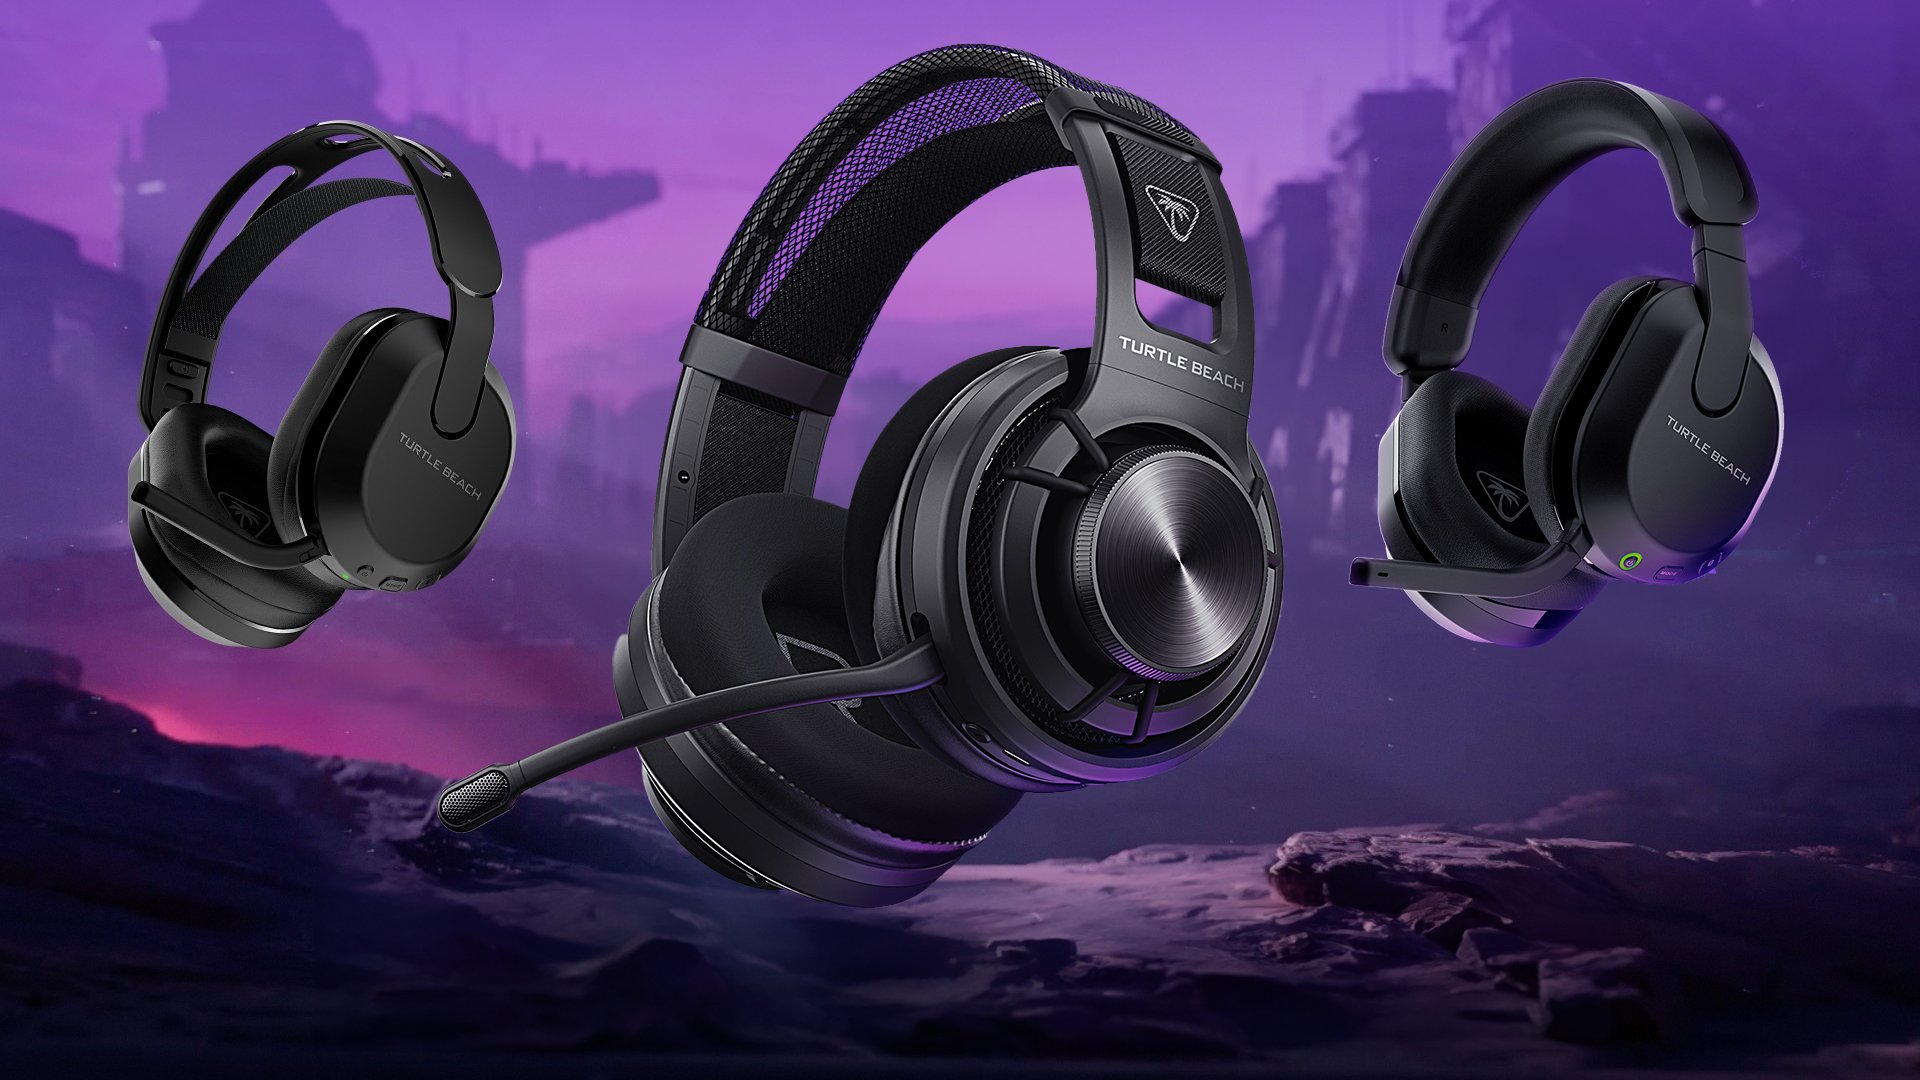 Upgrade Your Gamer Gear with All the Latest from Turtle Beach!